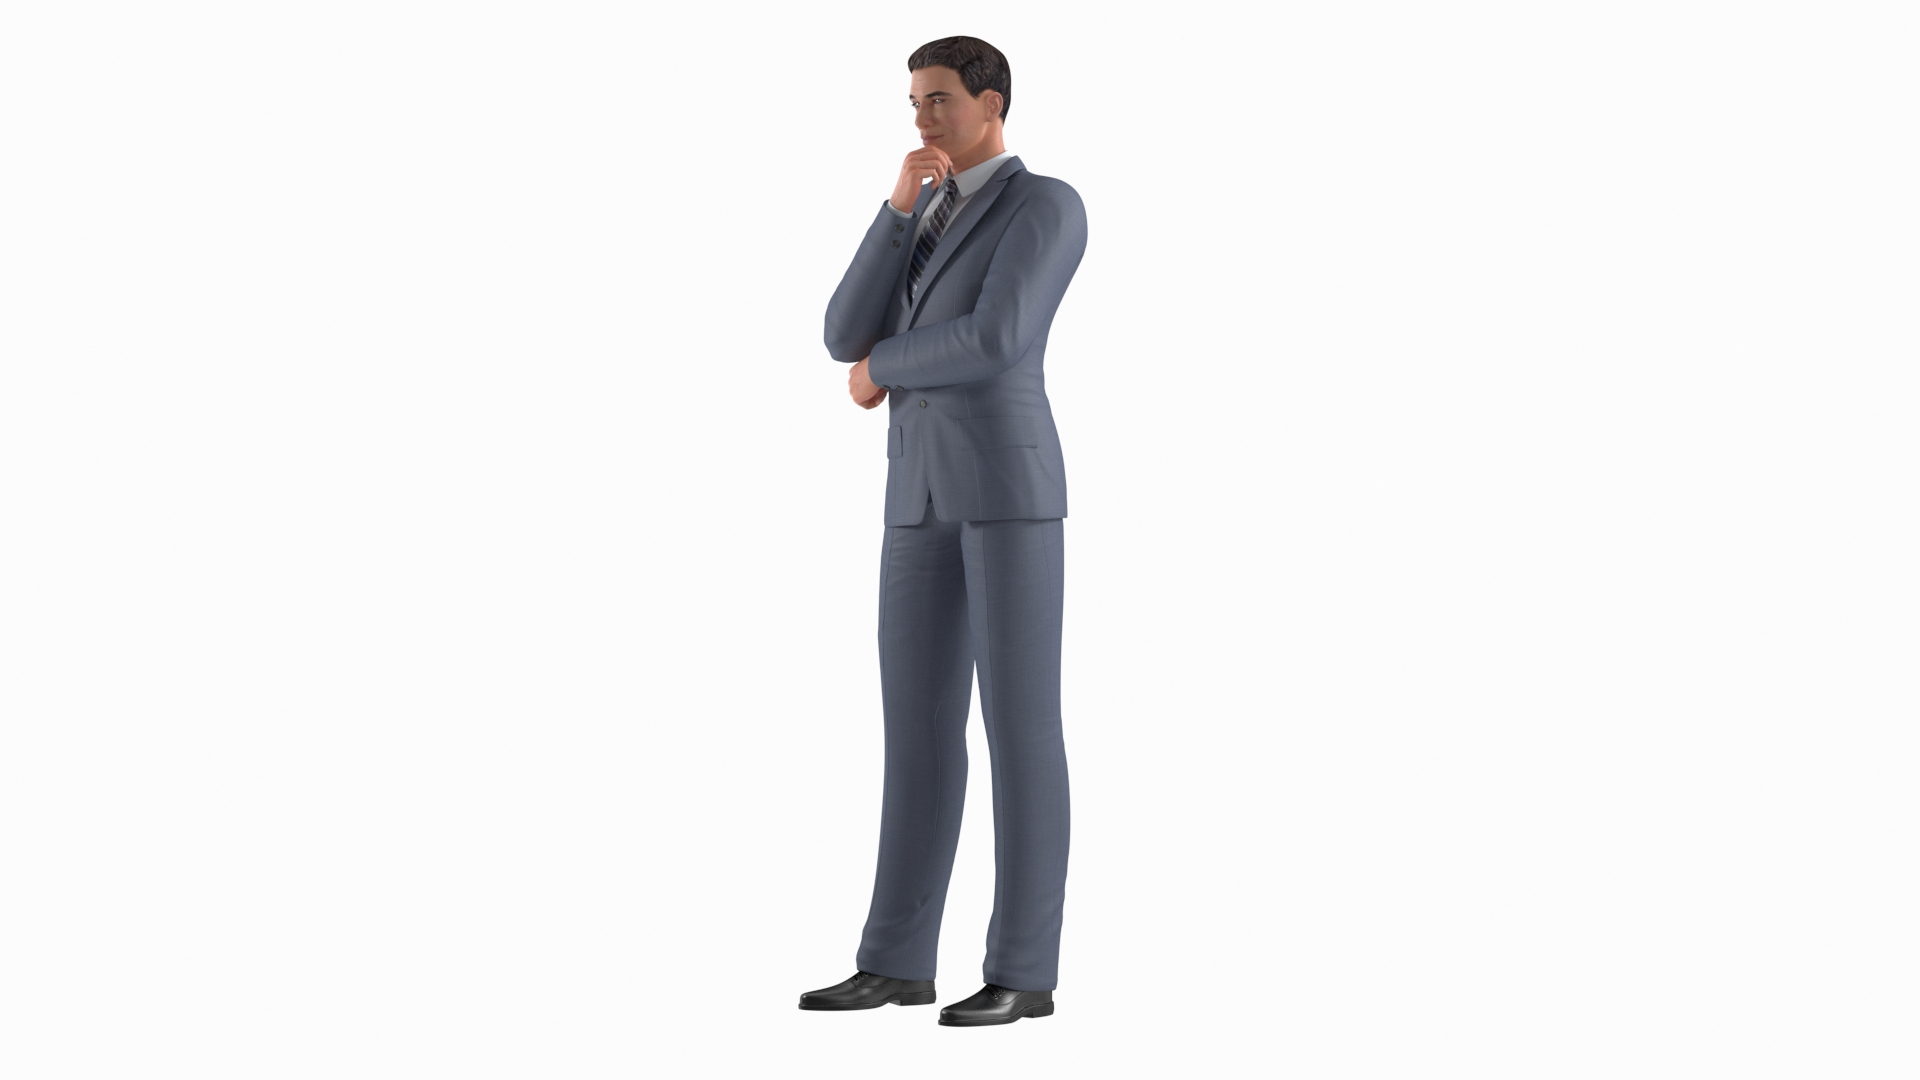 Man Thinking Pose Looking Right Which Stock Photo 66967690 | Shutterstock